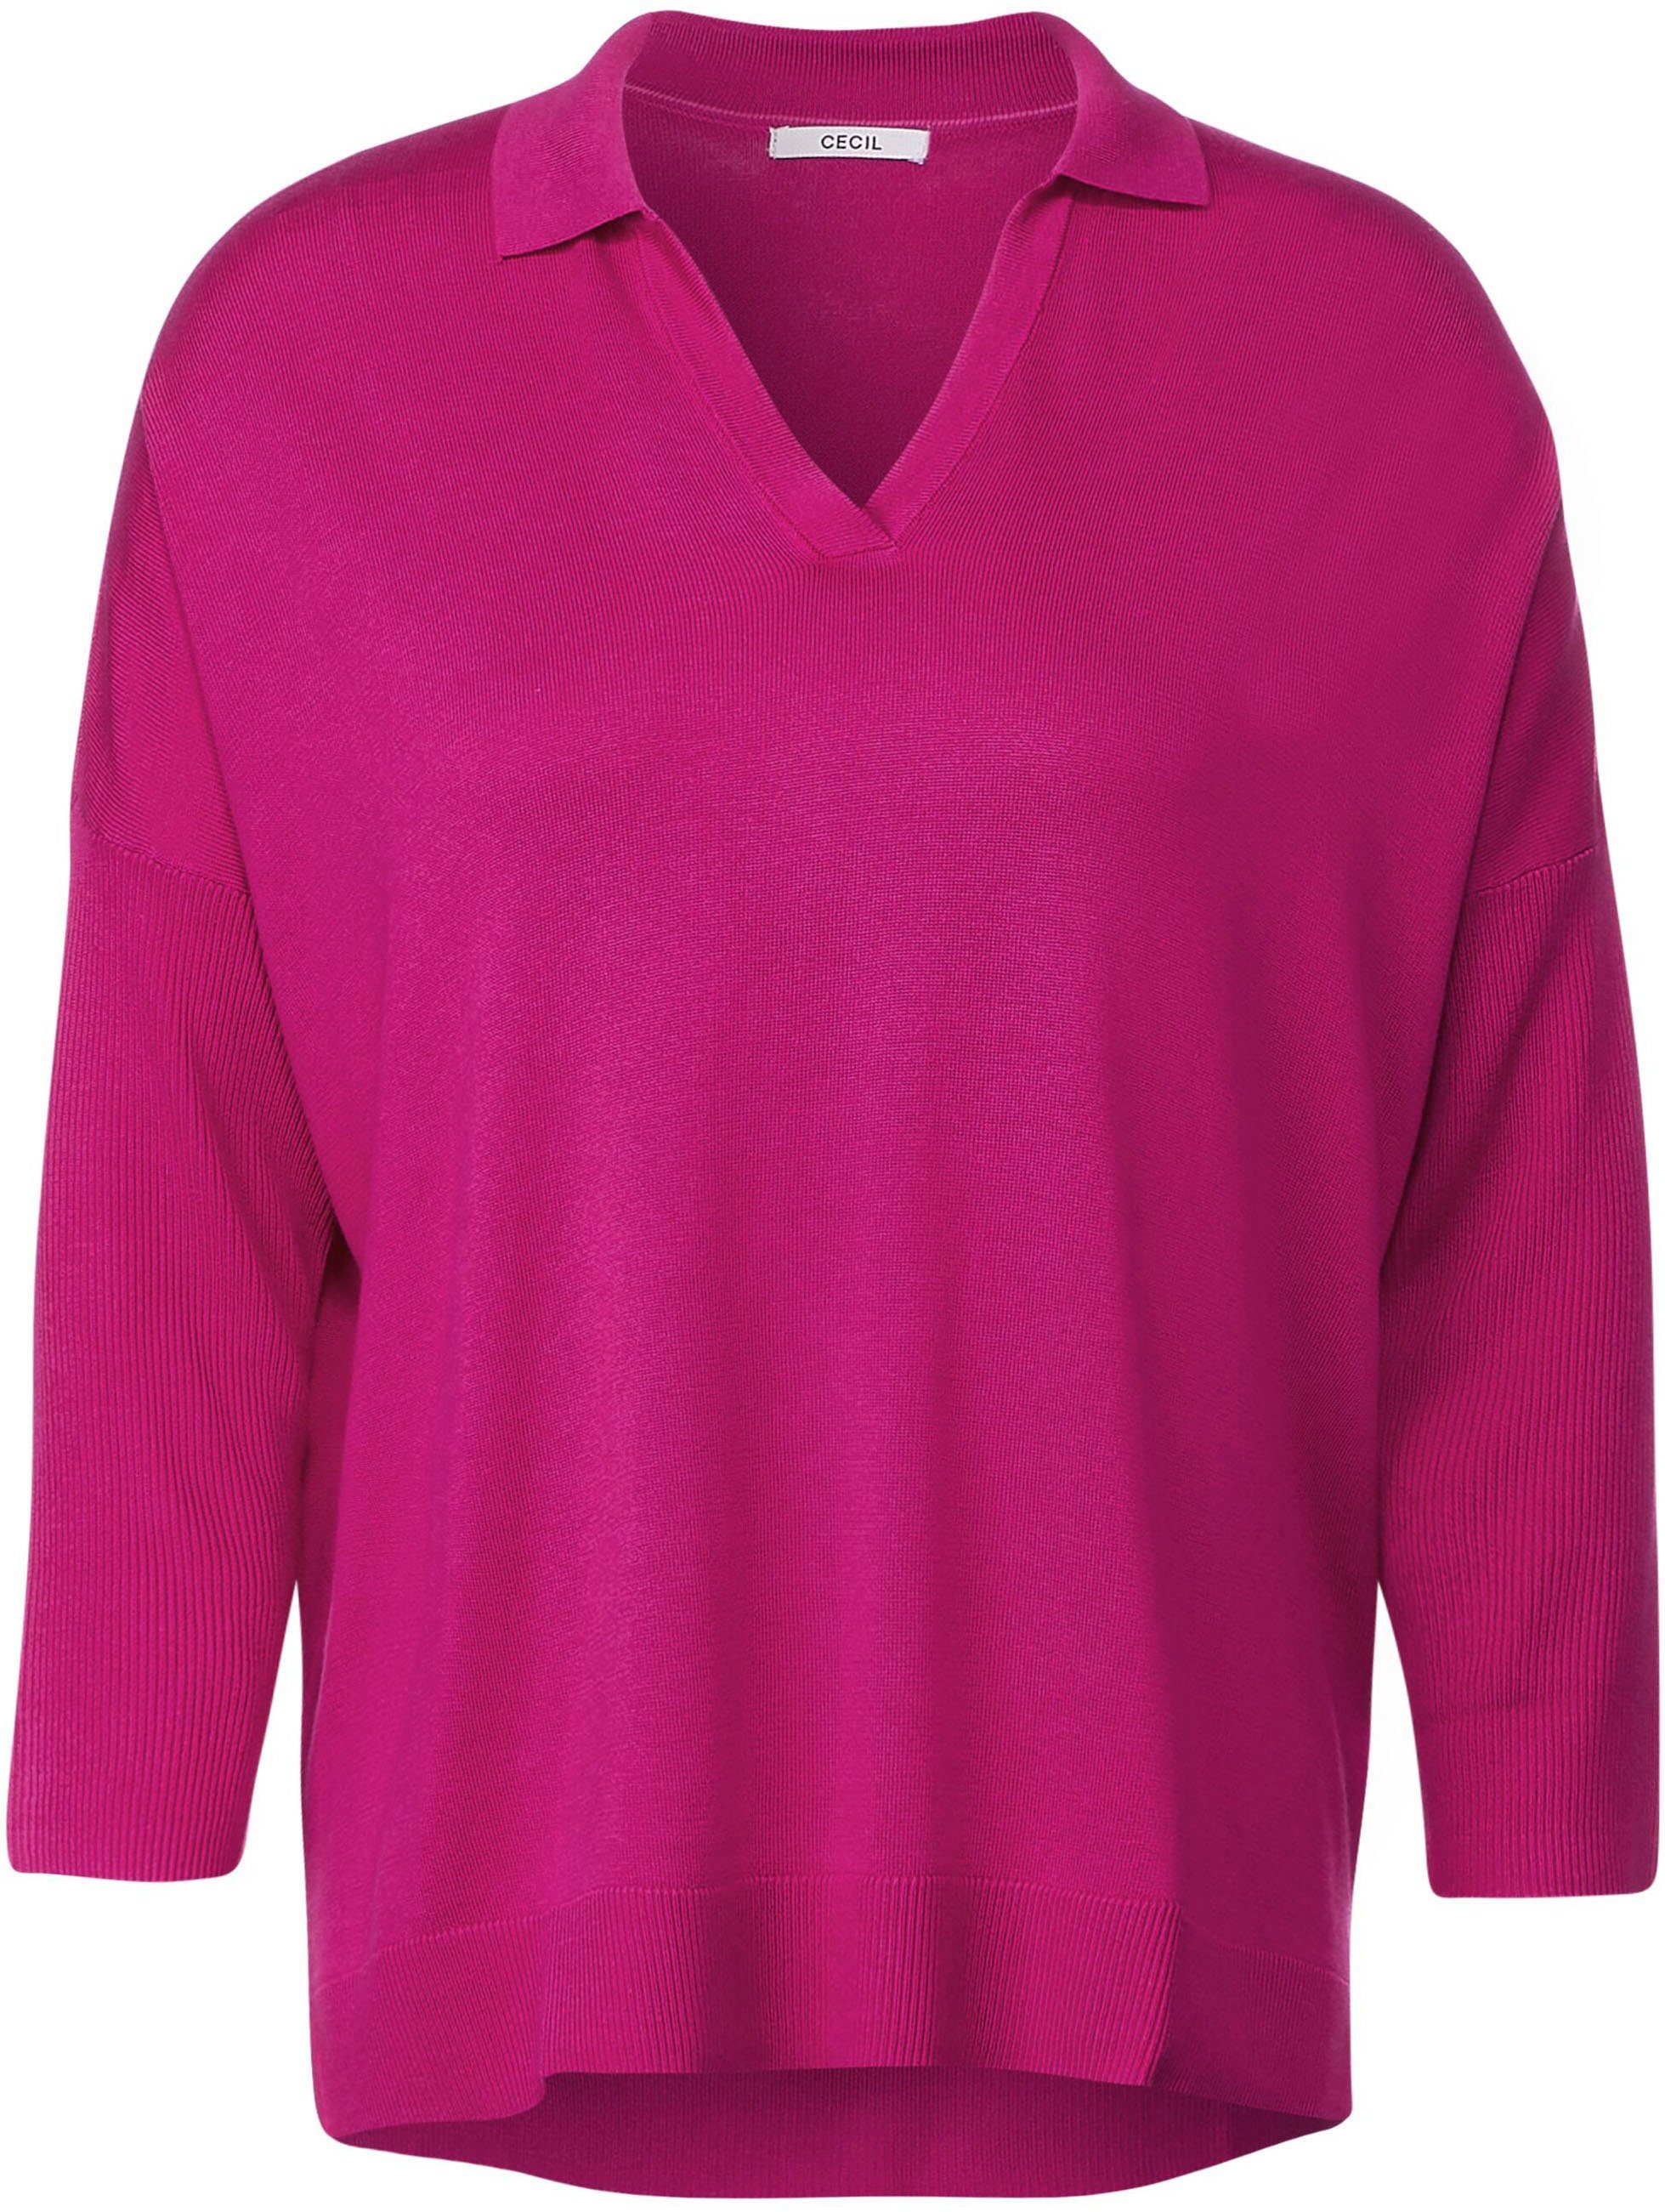 pink Polokragenpullover Cecil in Unifarbe cool